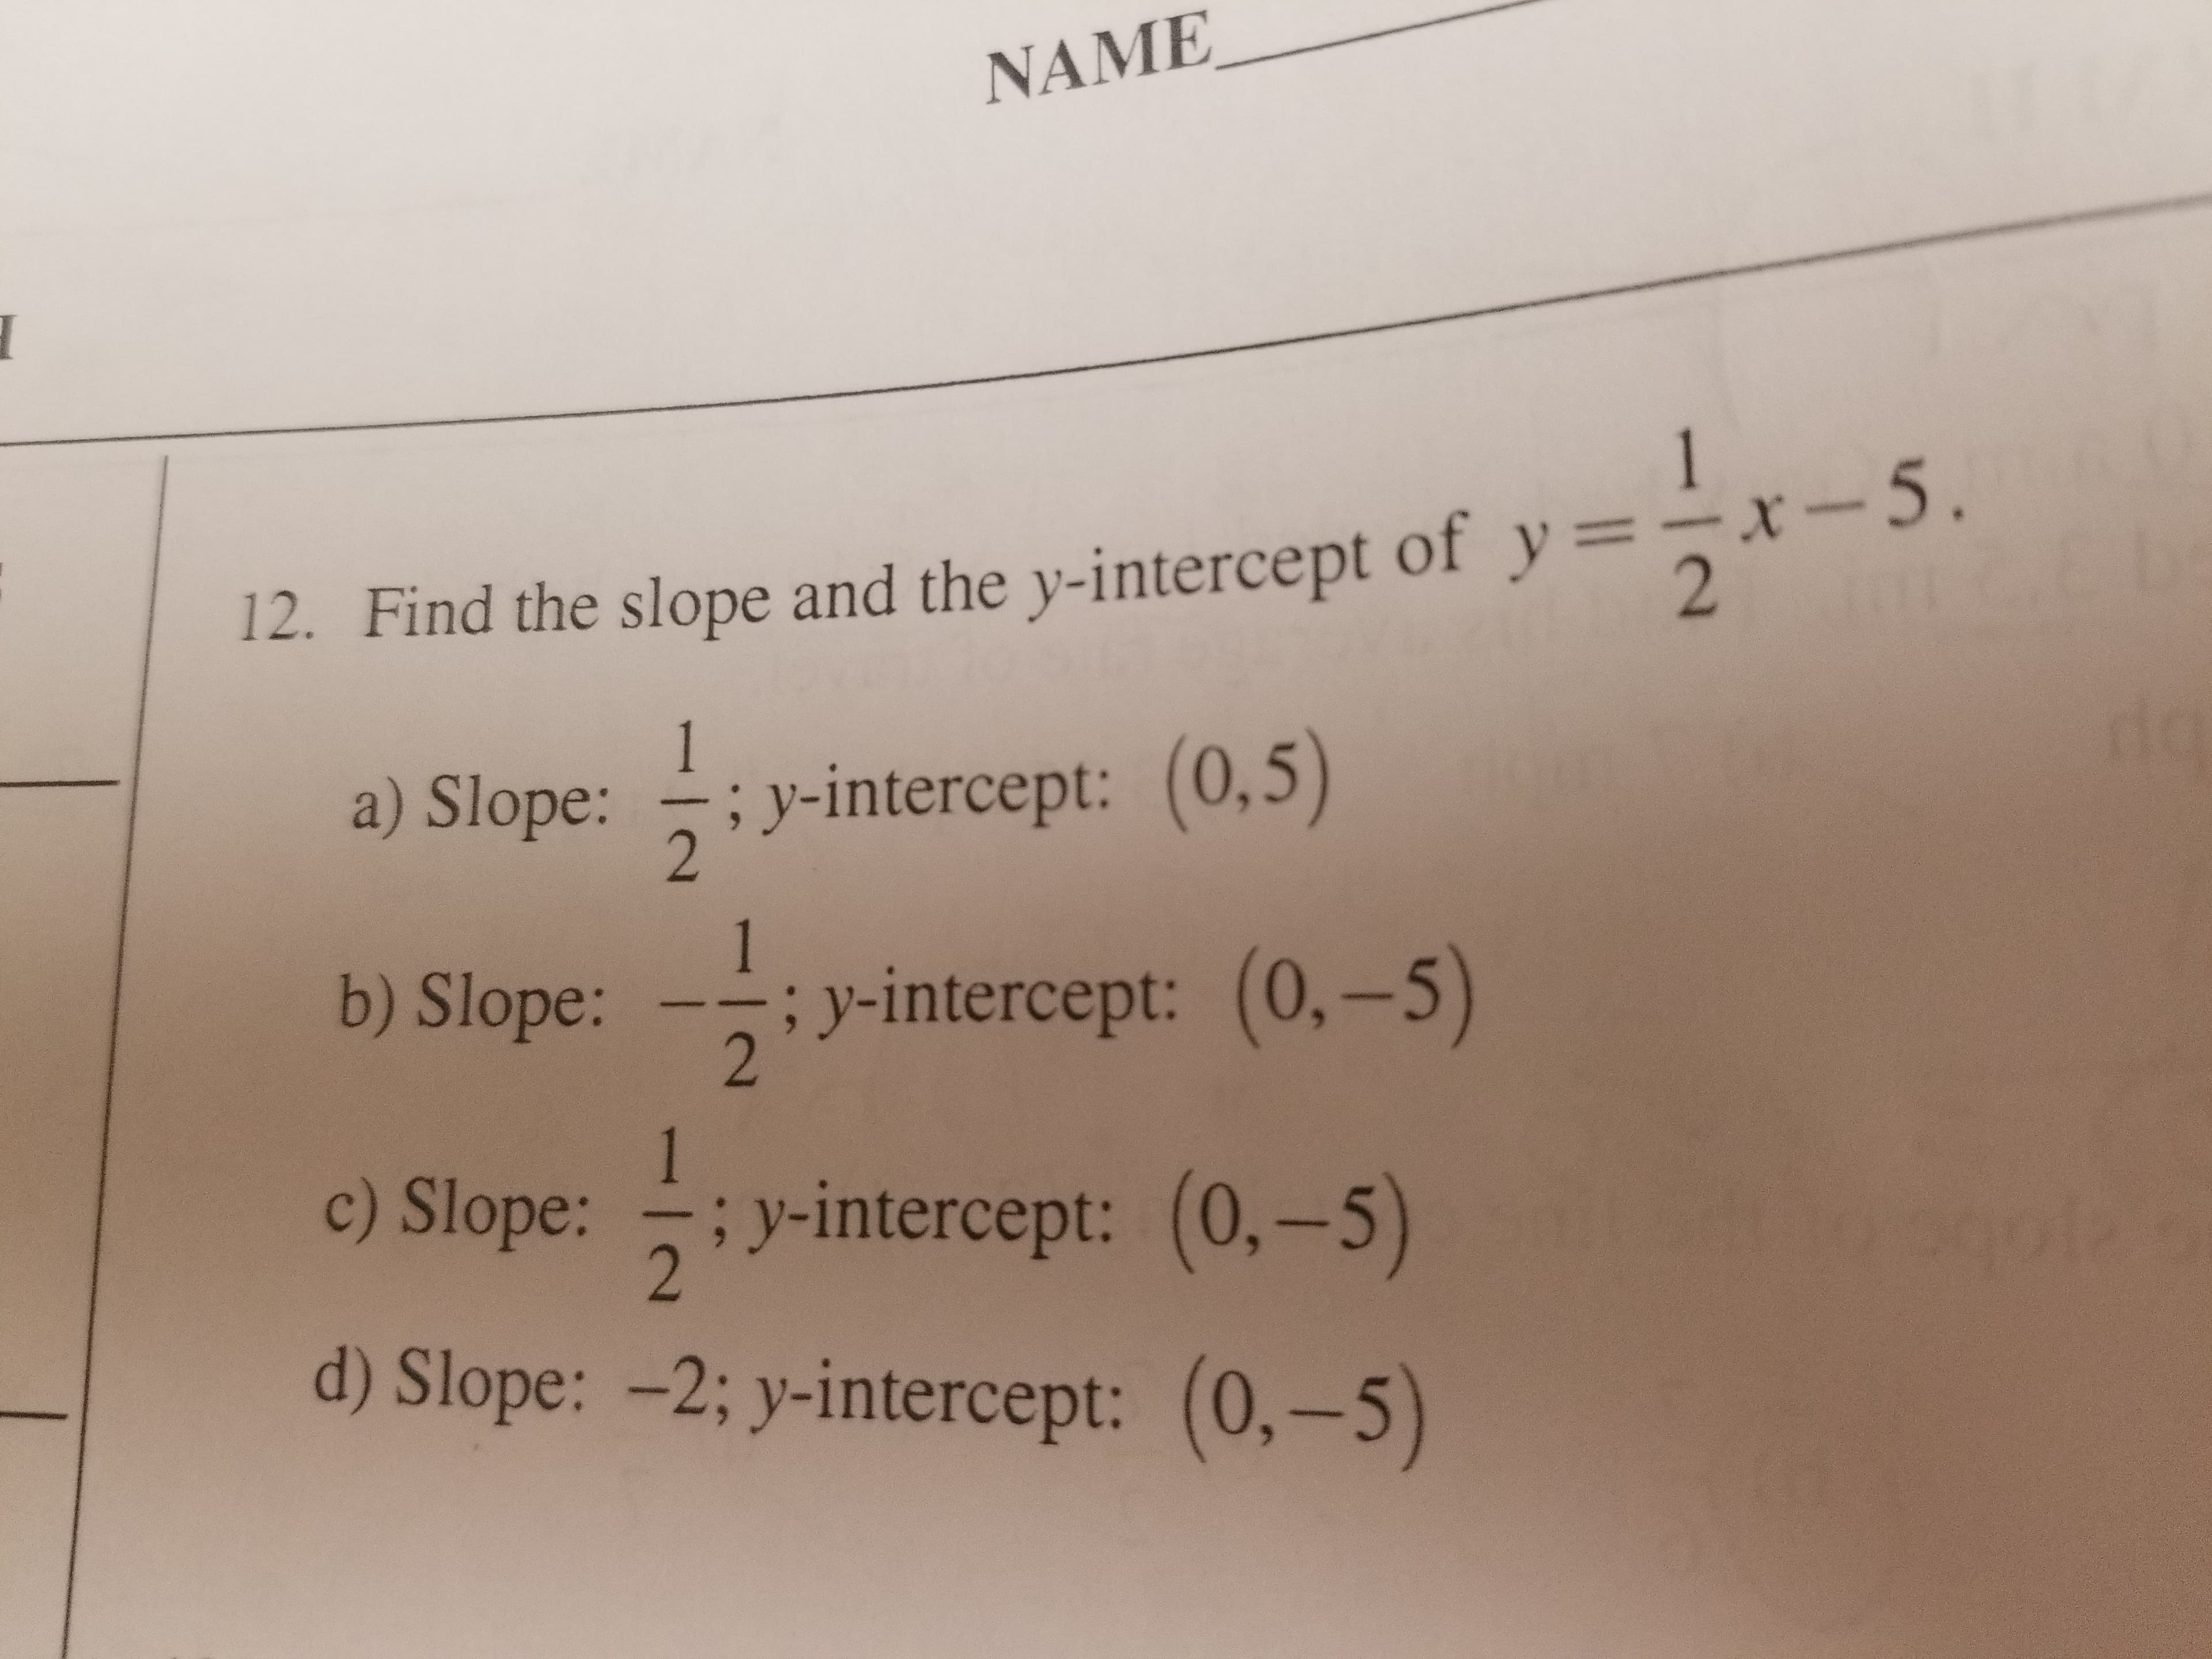 NAME
12. Find the slope and the y-intercept of y =-x-5
a) Slope:
y-intercept: (0,5
4: y-intercept (0.-5)
b) Slope:
--;
inte
o:-intercept: (0.-5)
d) Slope: -2; y intercept: (0,-5)
